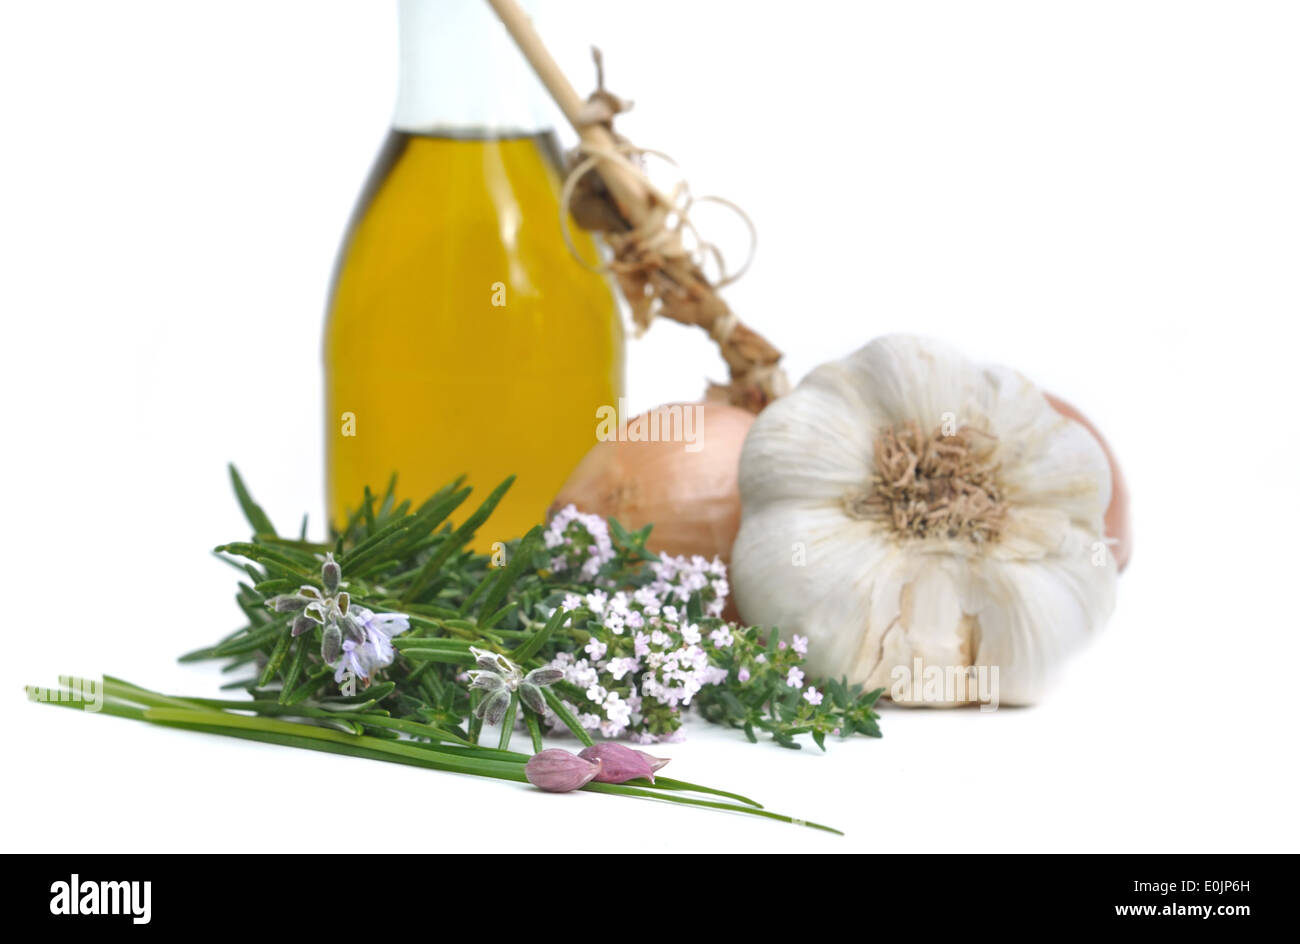 Aromatic herbs, onions, garlic and oil bottle for seasoning Stock Photo